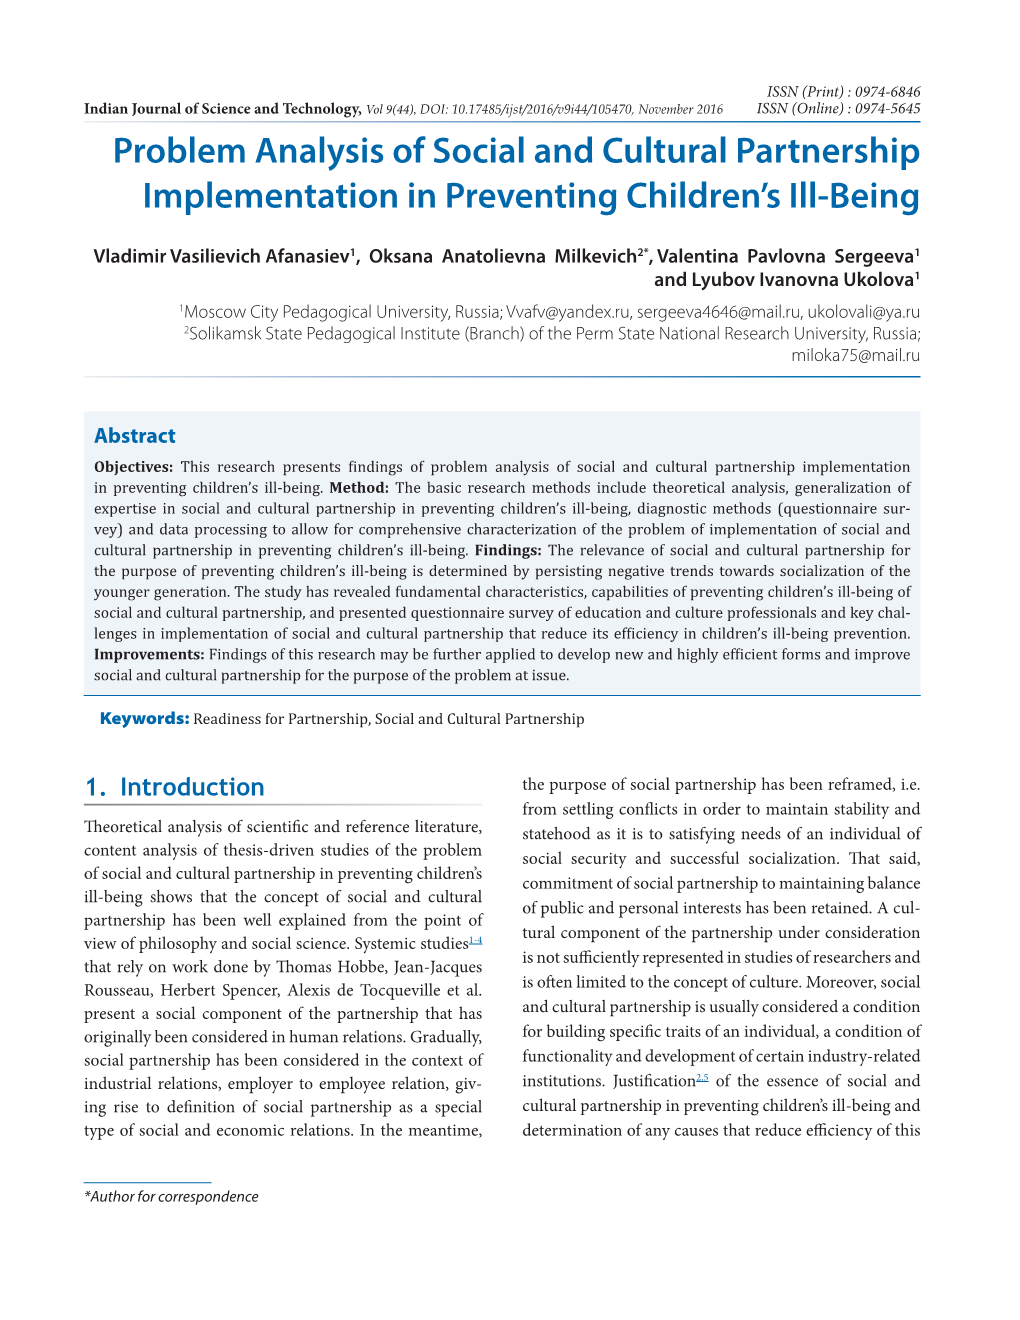 Problem Analysis of Social and Cultural Partnership Implementation in Preventing Children’S Ill-Being